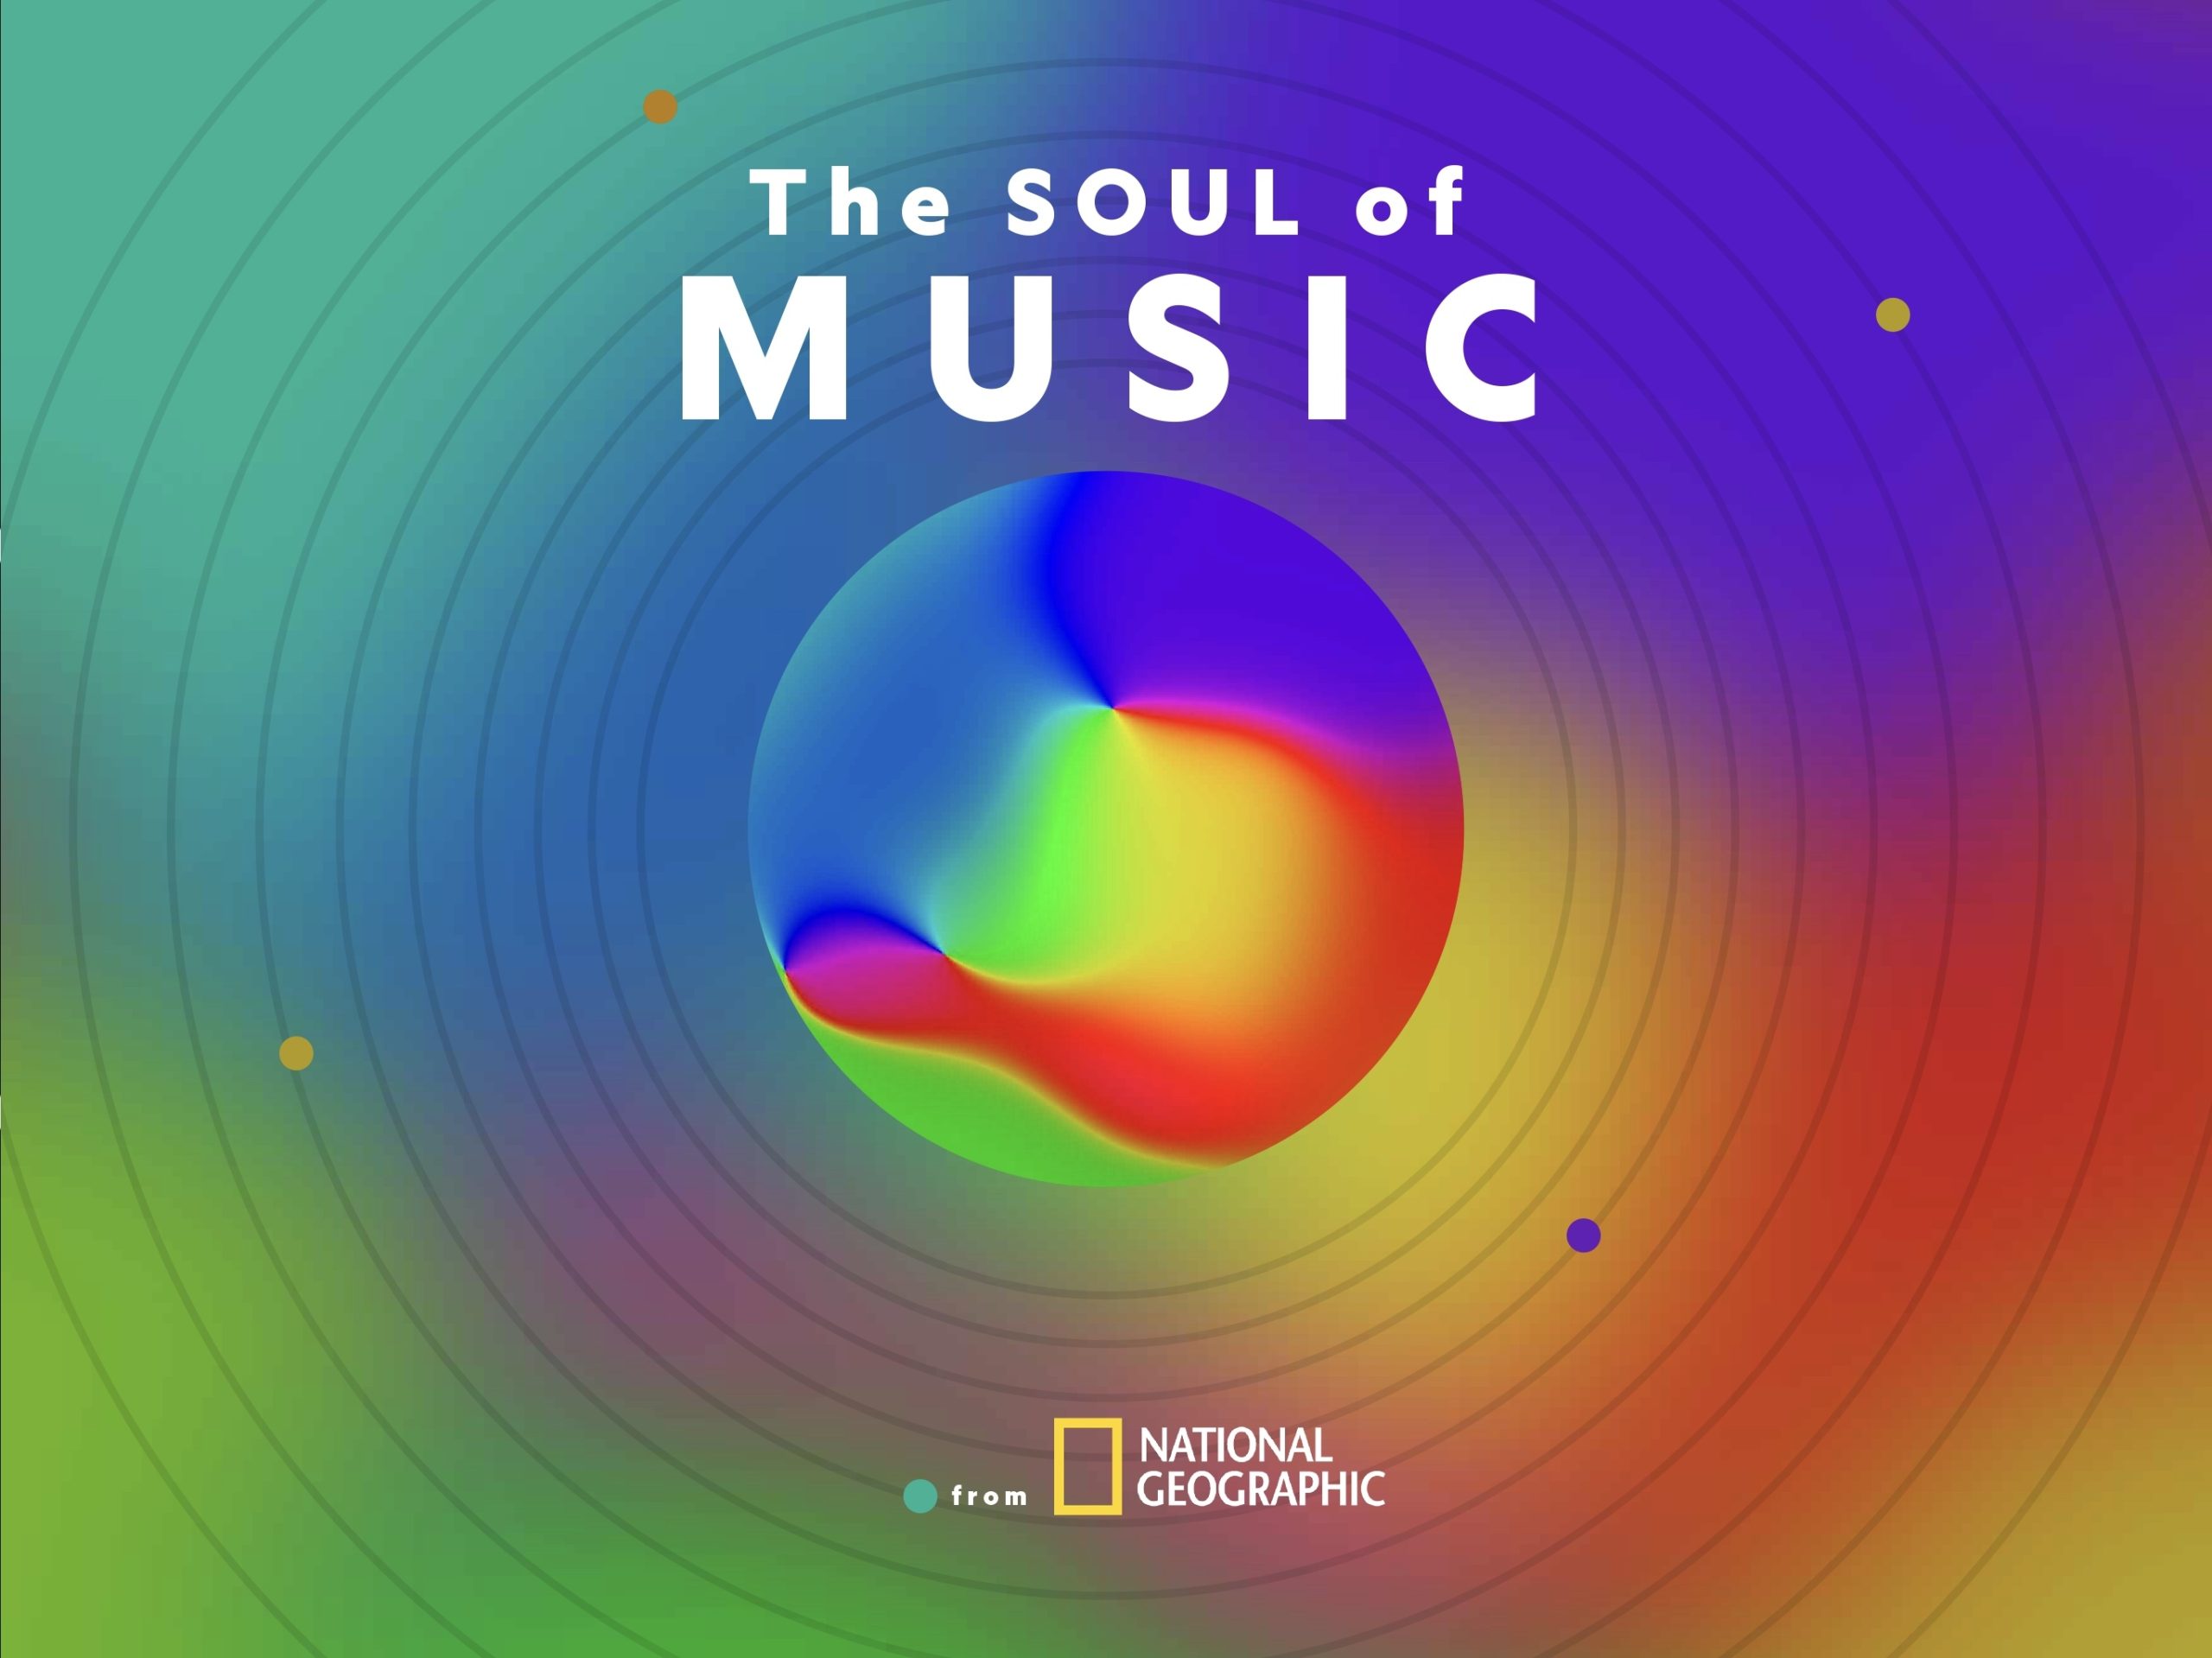 NATIONAL GEOGRAPHIC LAUNCHES FOUR-PART PODCAST SERIES, THE SOUL OF MUSIC, FEATURING MUSICIANS AND NATIONAL GEOGRAPHIC EXPLORERS IN CONVERSATION ON MUSIC AND EXPLORATION